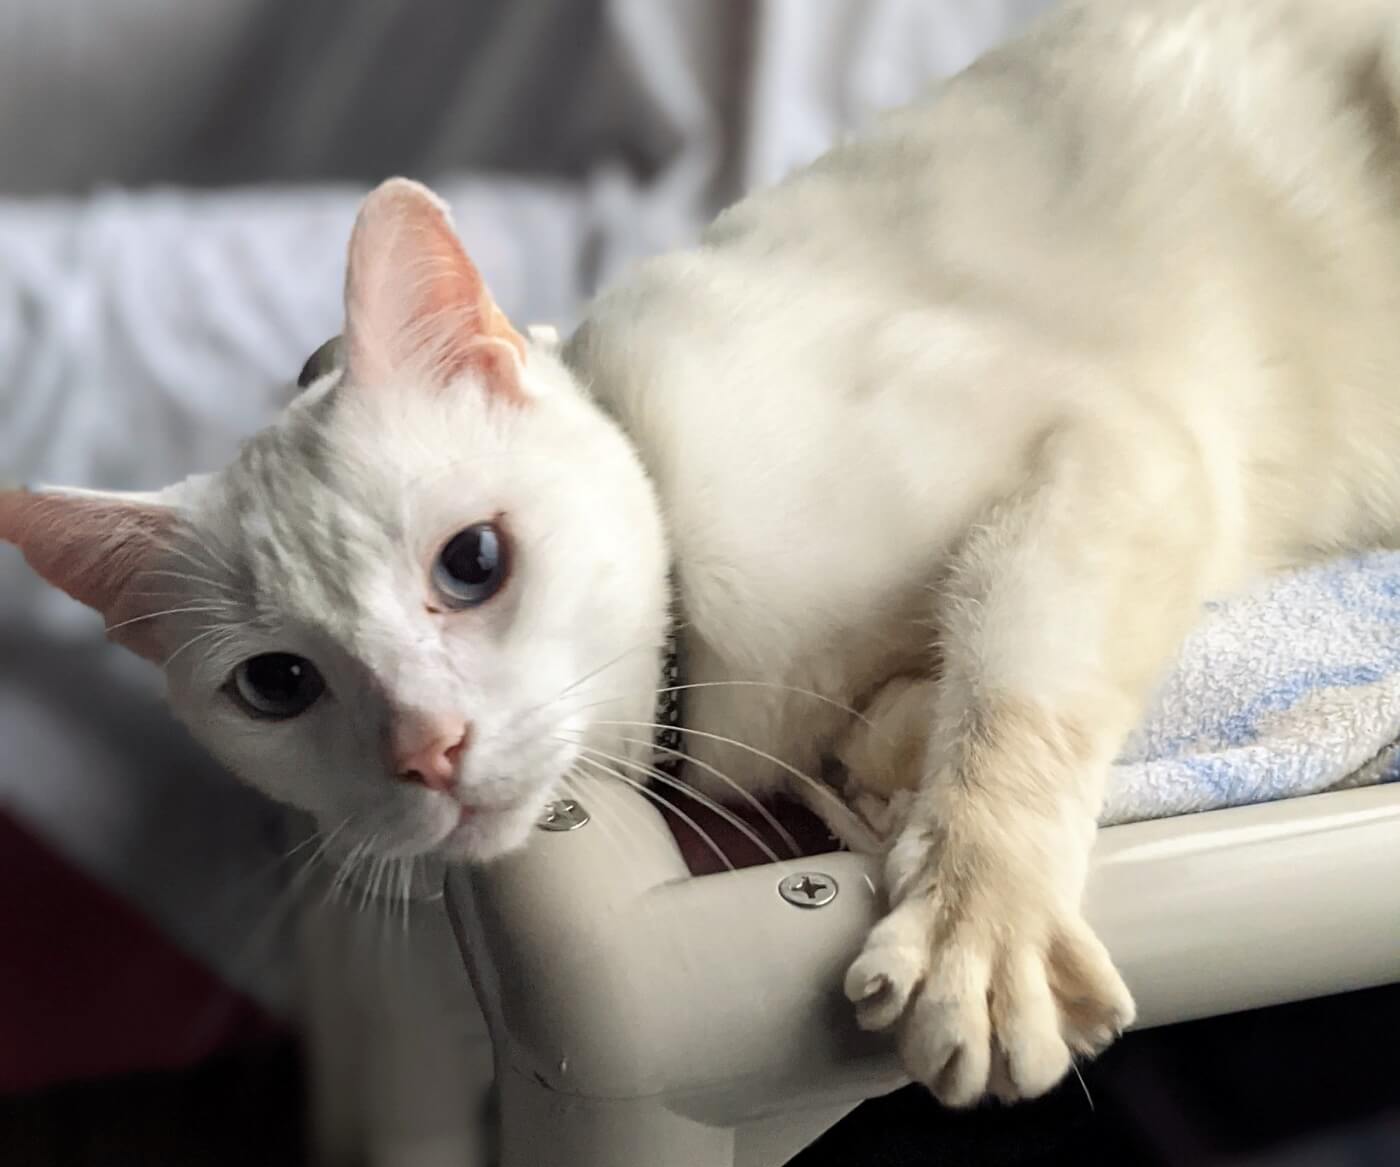 Adoptable deaf cat Desmond lying on his side